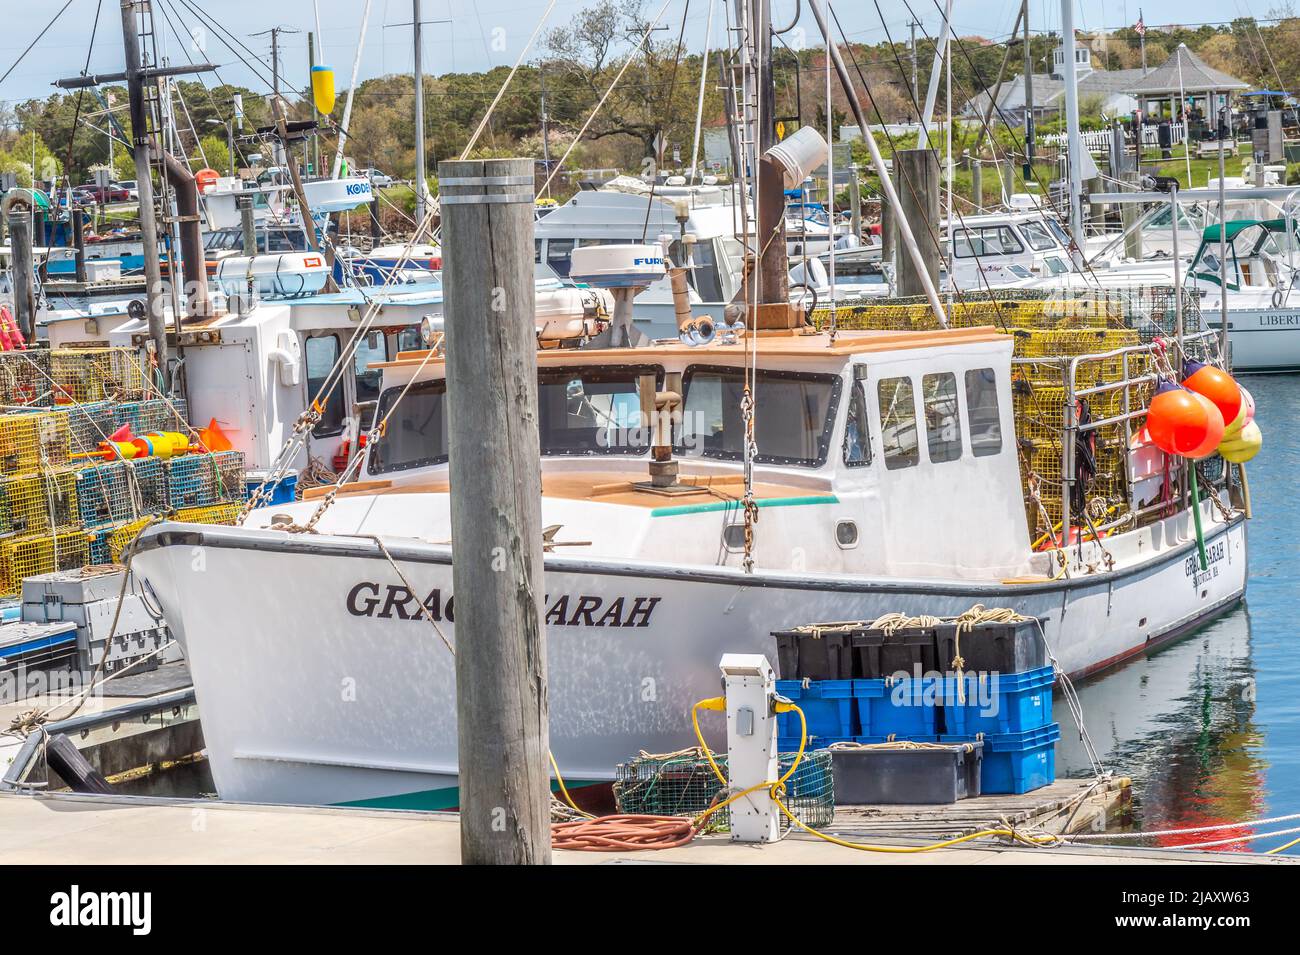 A sunny weekend in Spring. Fishing boats, an pleasure boats are all getting ready to go out in one way or another, for work or pleasure. your choice. Stock Photo